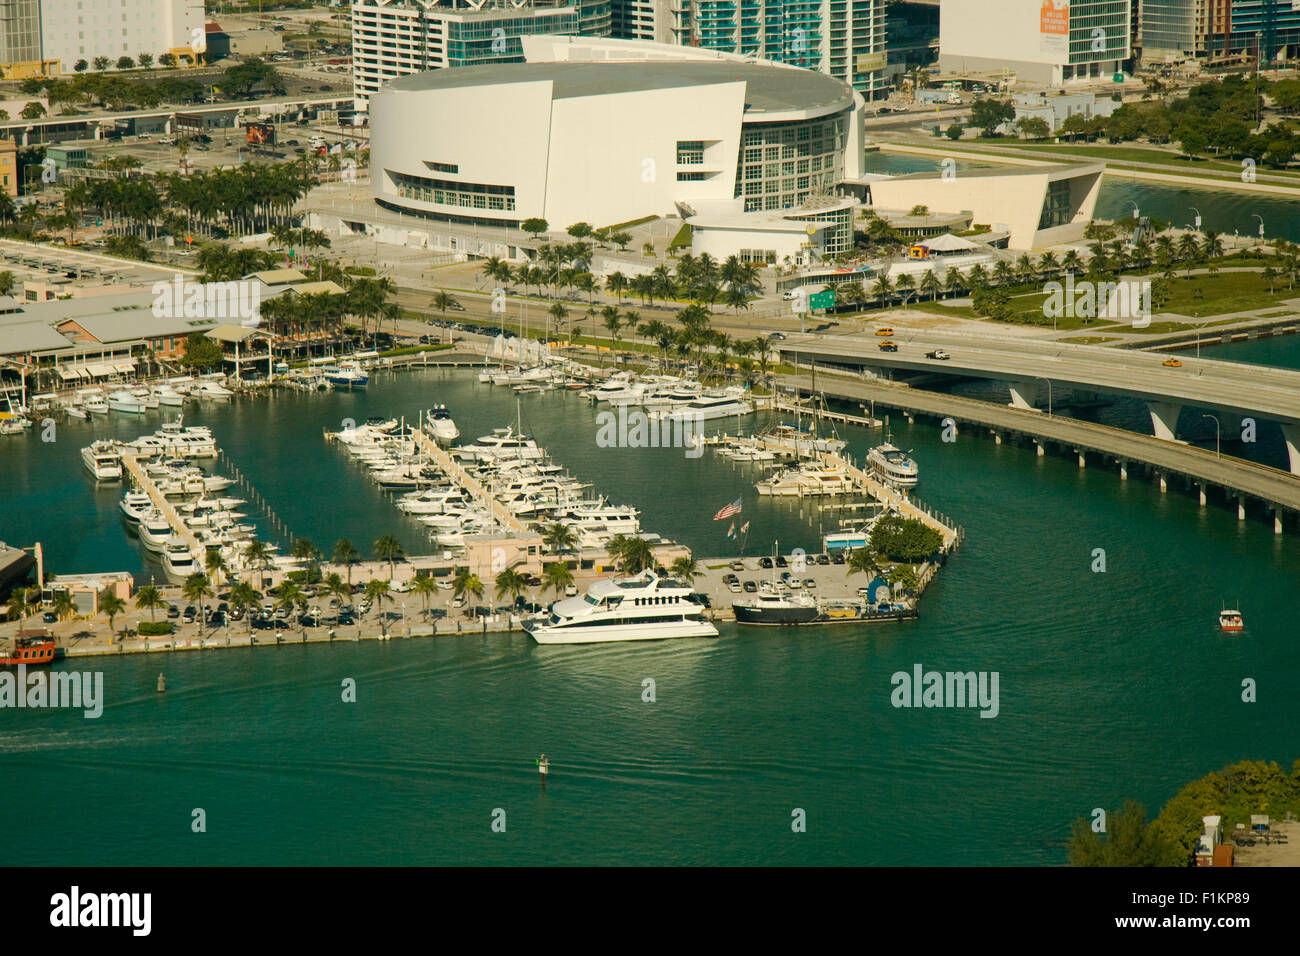 Aerial view of American Airlines Arena at the waterfront, Miami, Miami-Dade County, Florida, USA Stock Photo